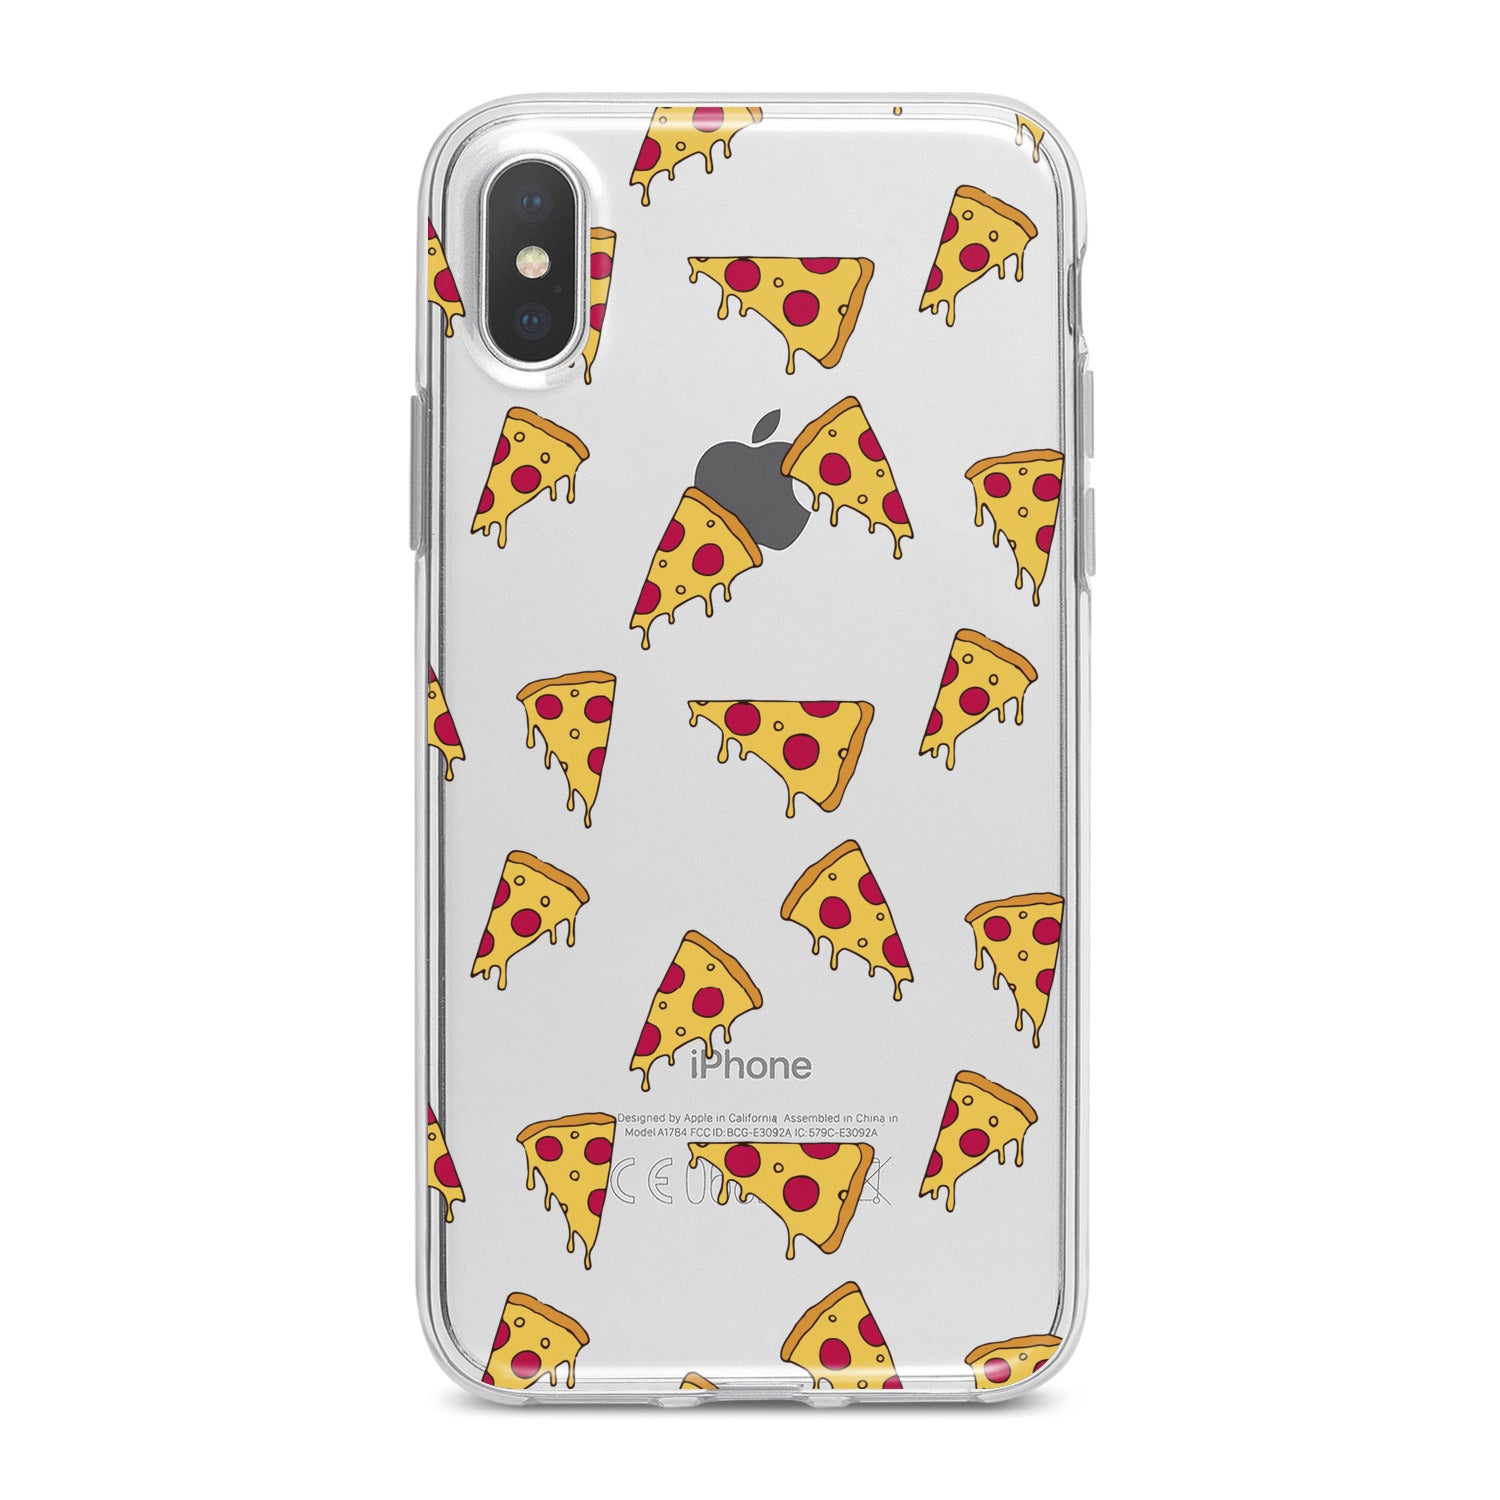 Lex Altern Pizza Pattern Phone Case for your iPhone & Android phone.